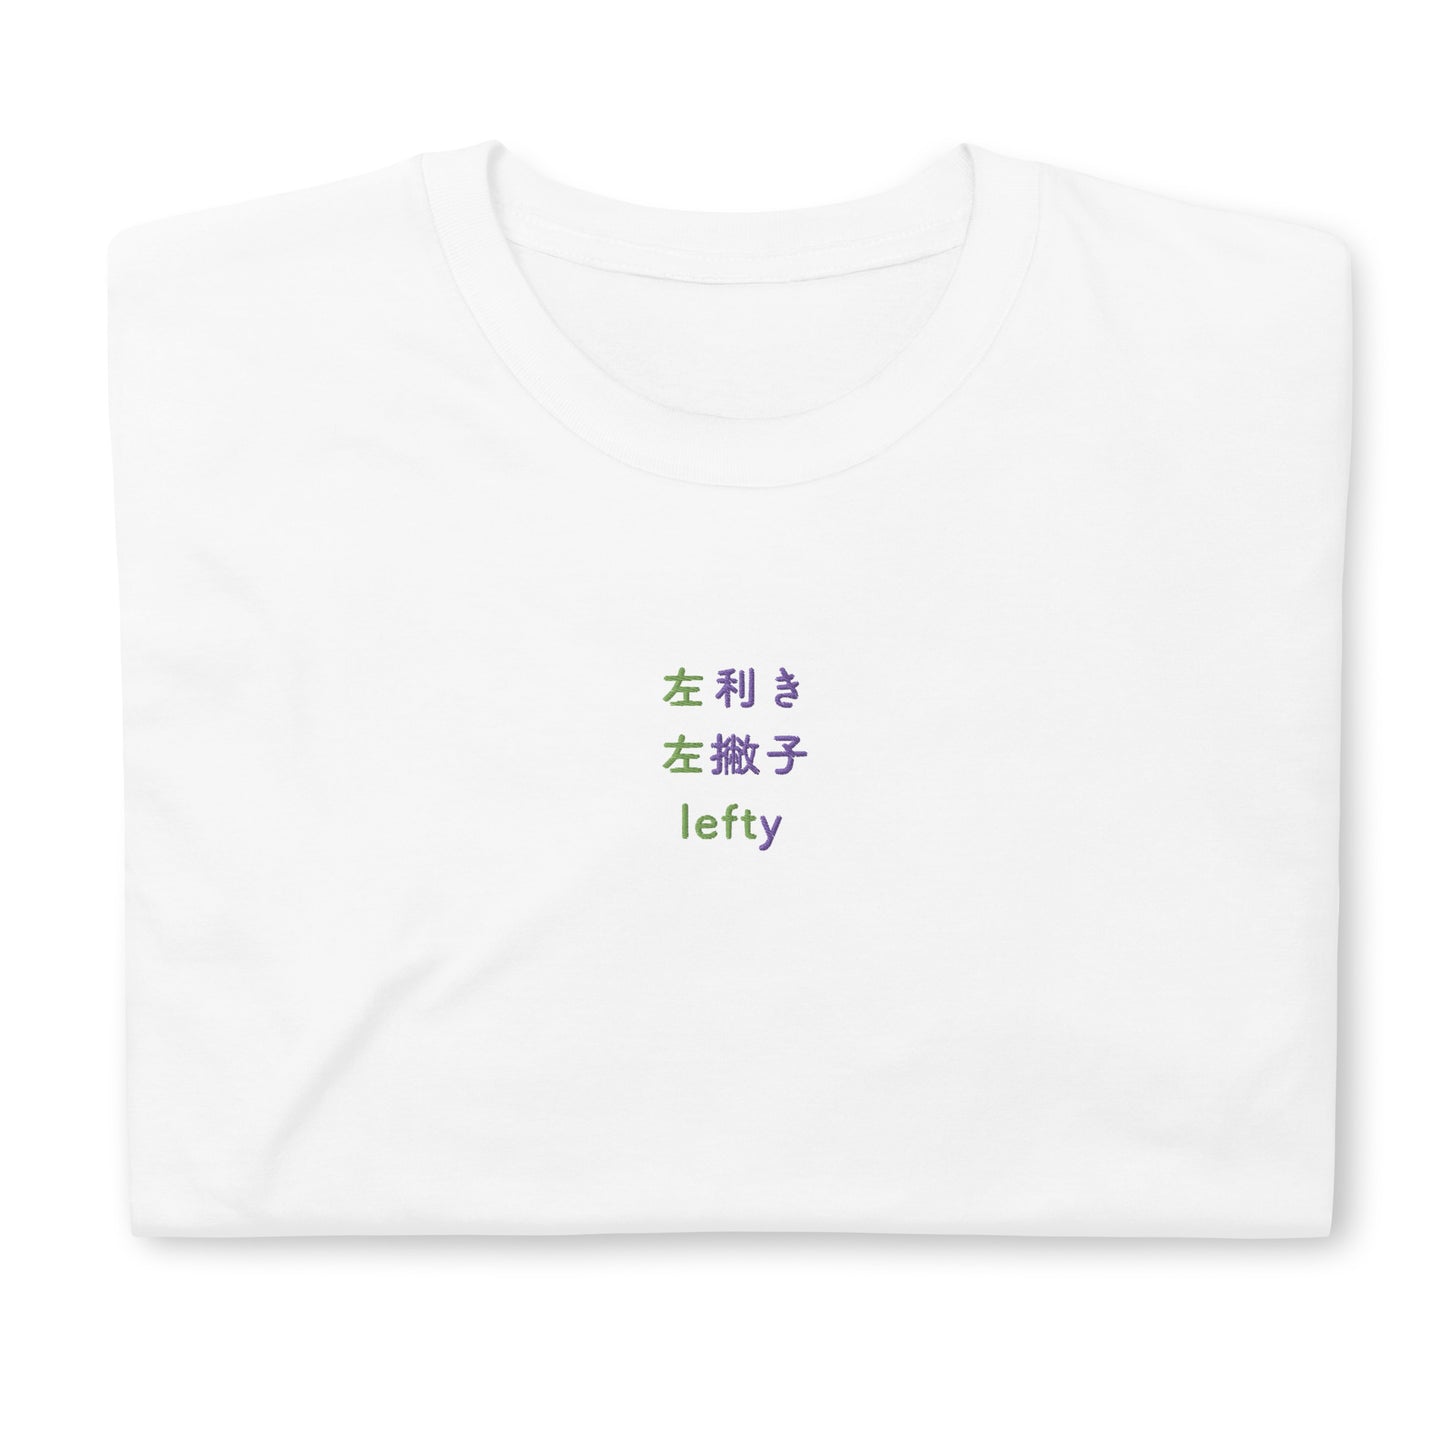 White High Quality Tee - Front Design with an Green, Purple Embroidery "Lefty" in Japanese,Chinese and English